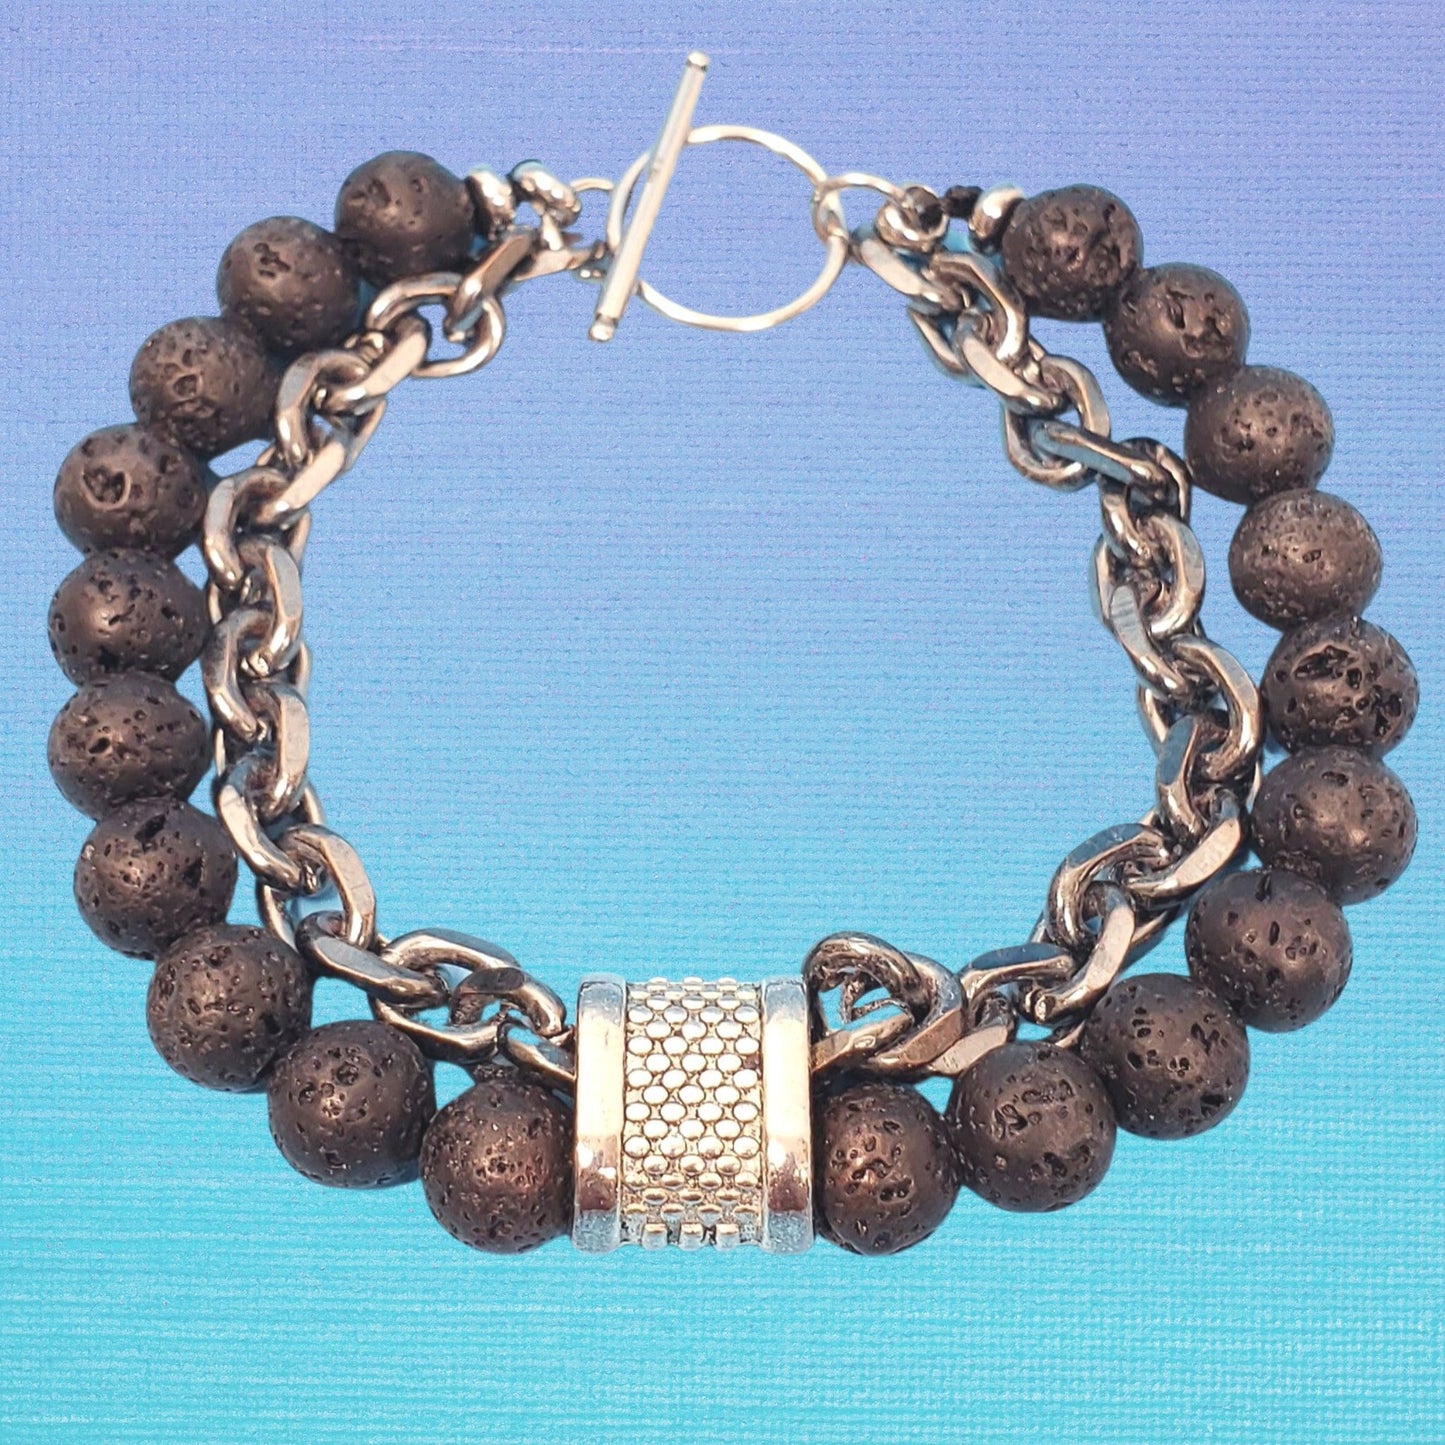 Black Lava Bead Bracelet with Chain and Clasp